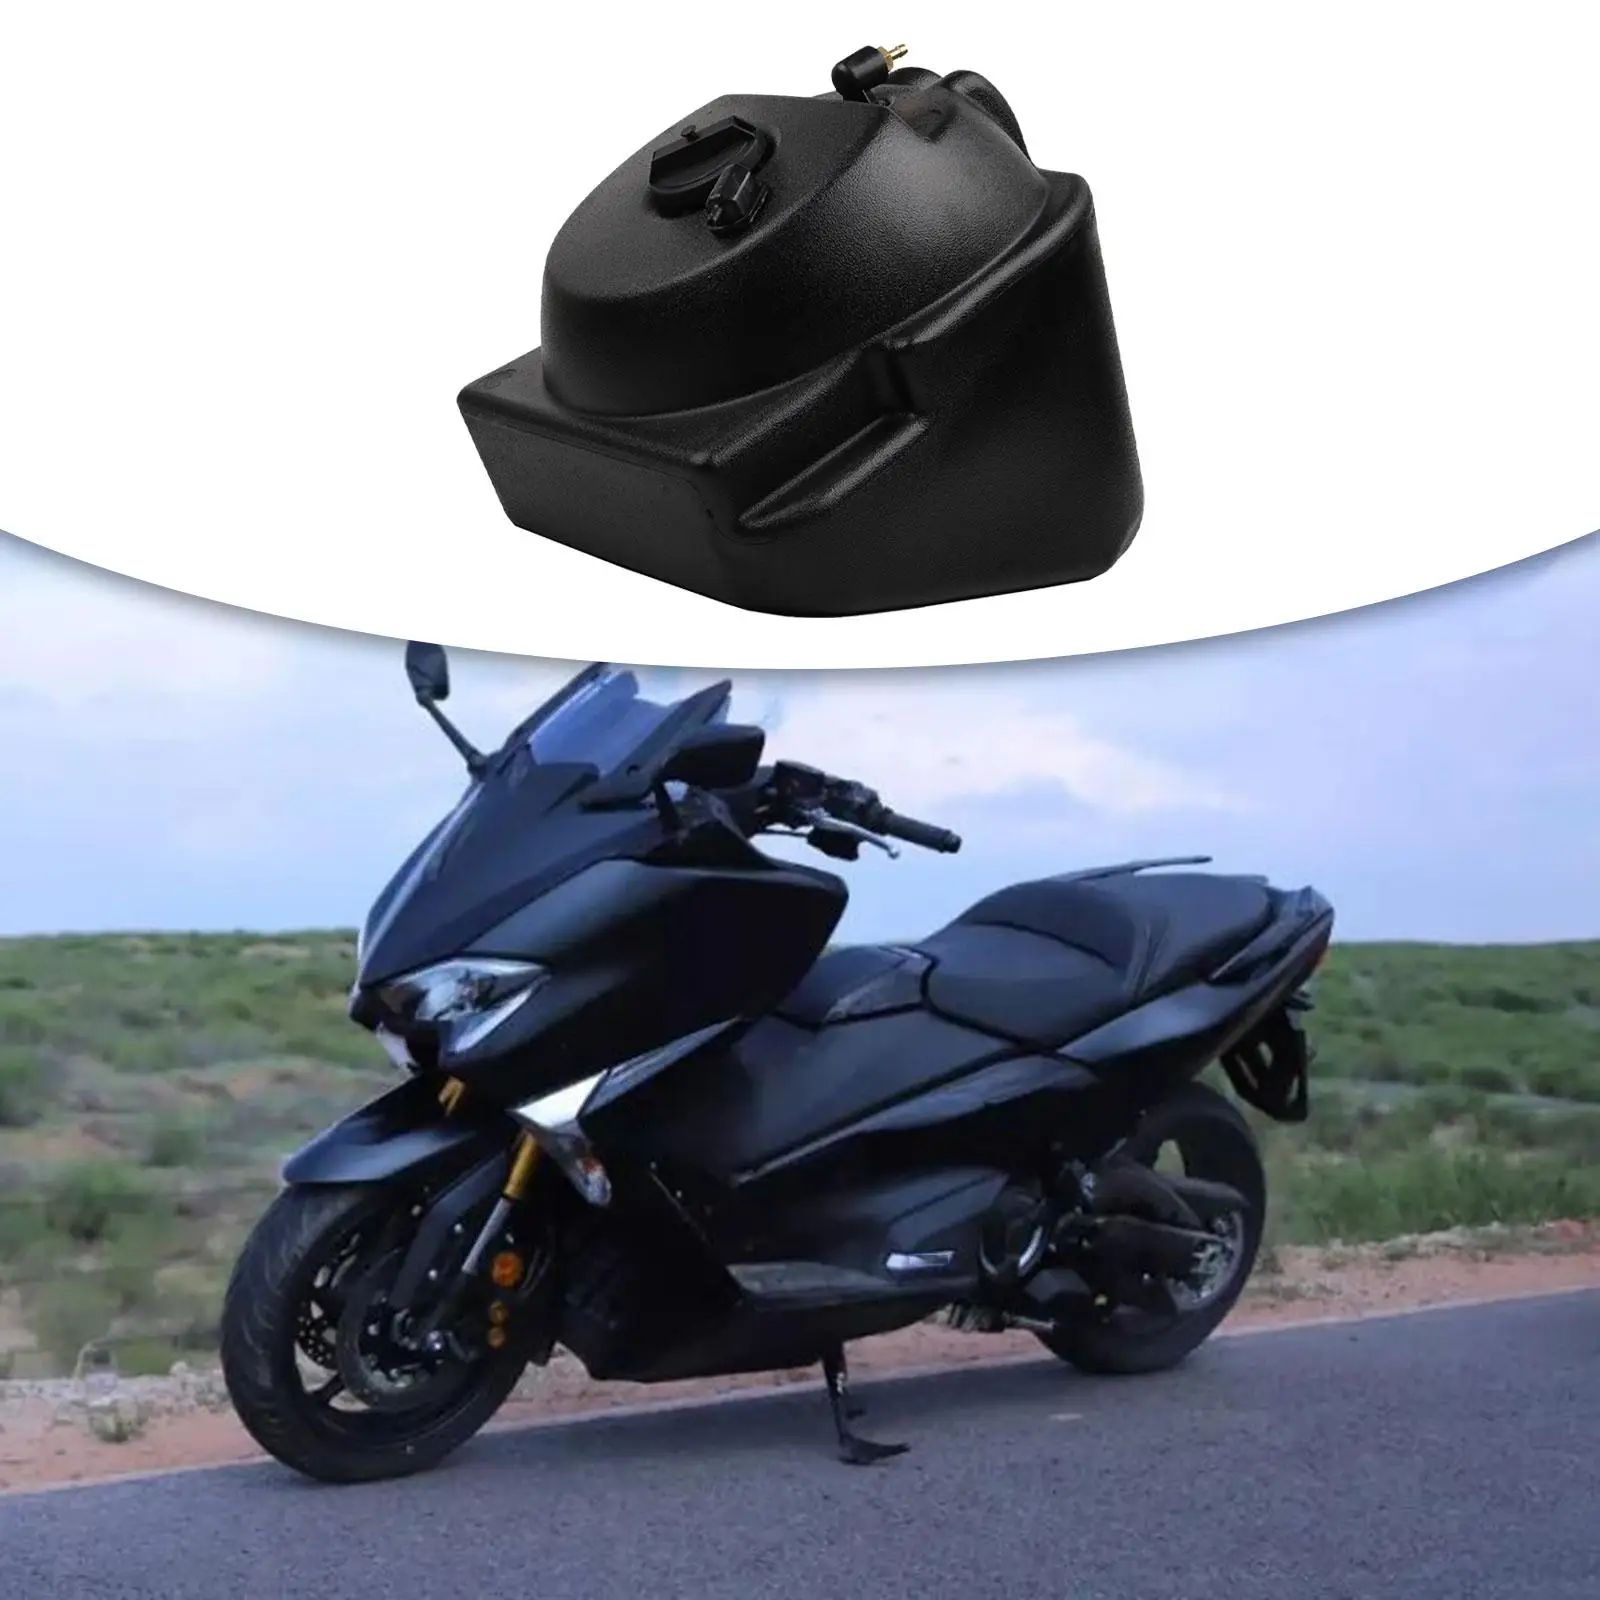 Auxiliary Fuel Tank Repair Parts Spare Parts Easy to Install Fuel Petrol Tank for Yamaha Tmax560 Nmax155 Xmax250 Xmax300